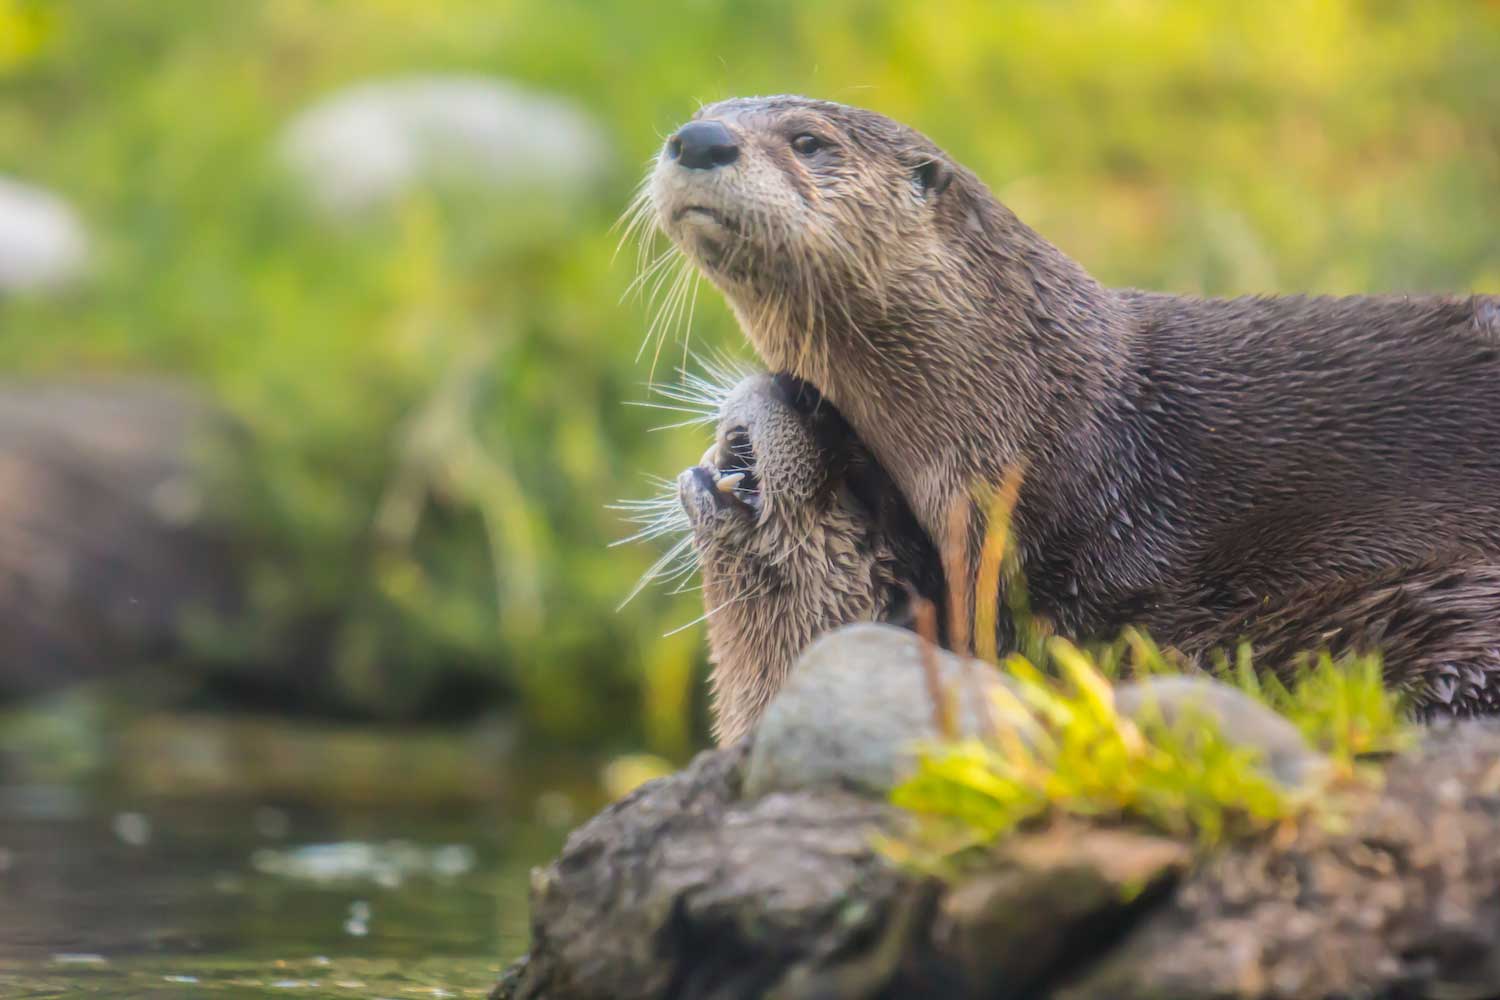 Two river otters standing next to one another on land.